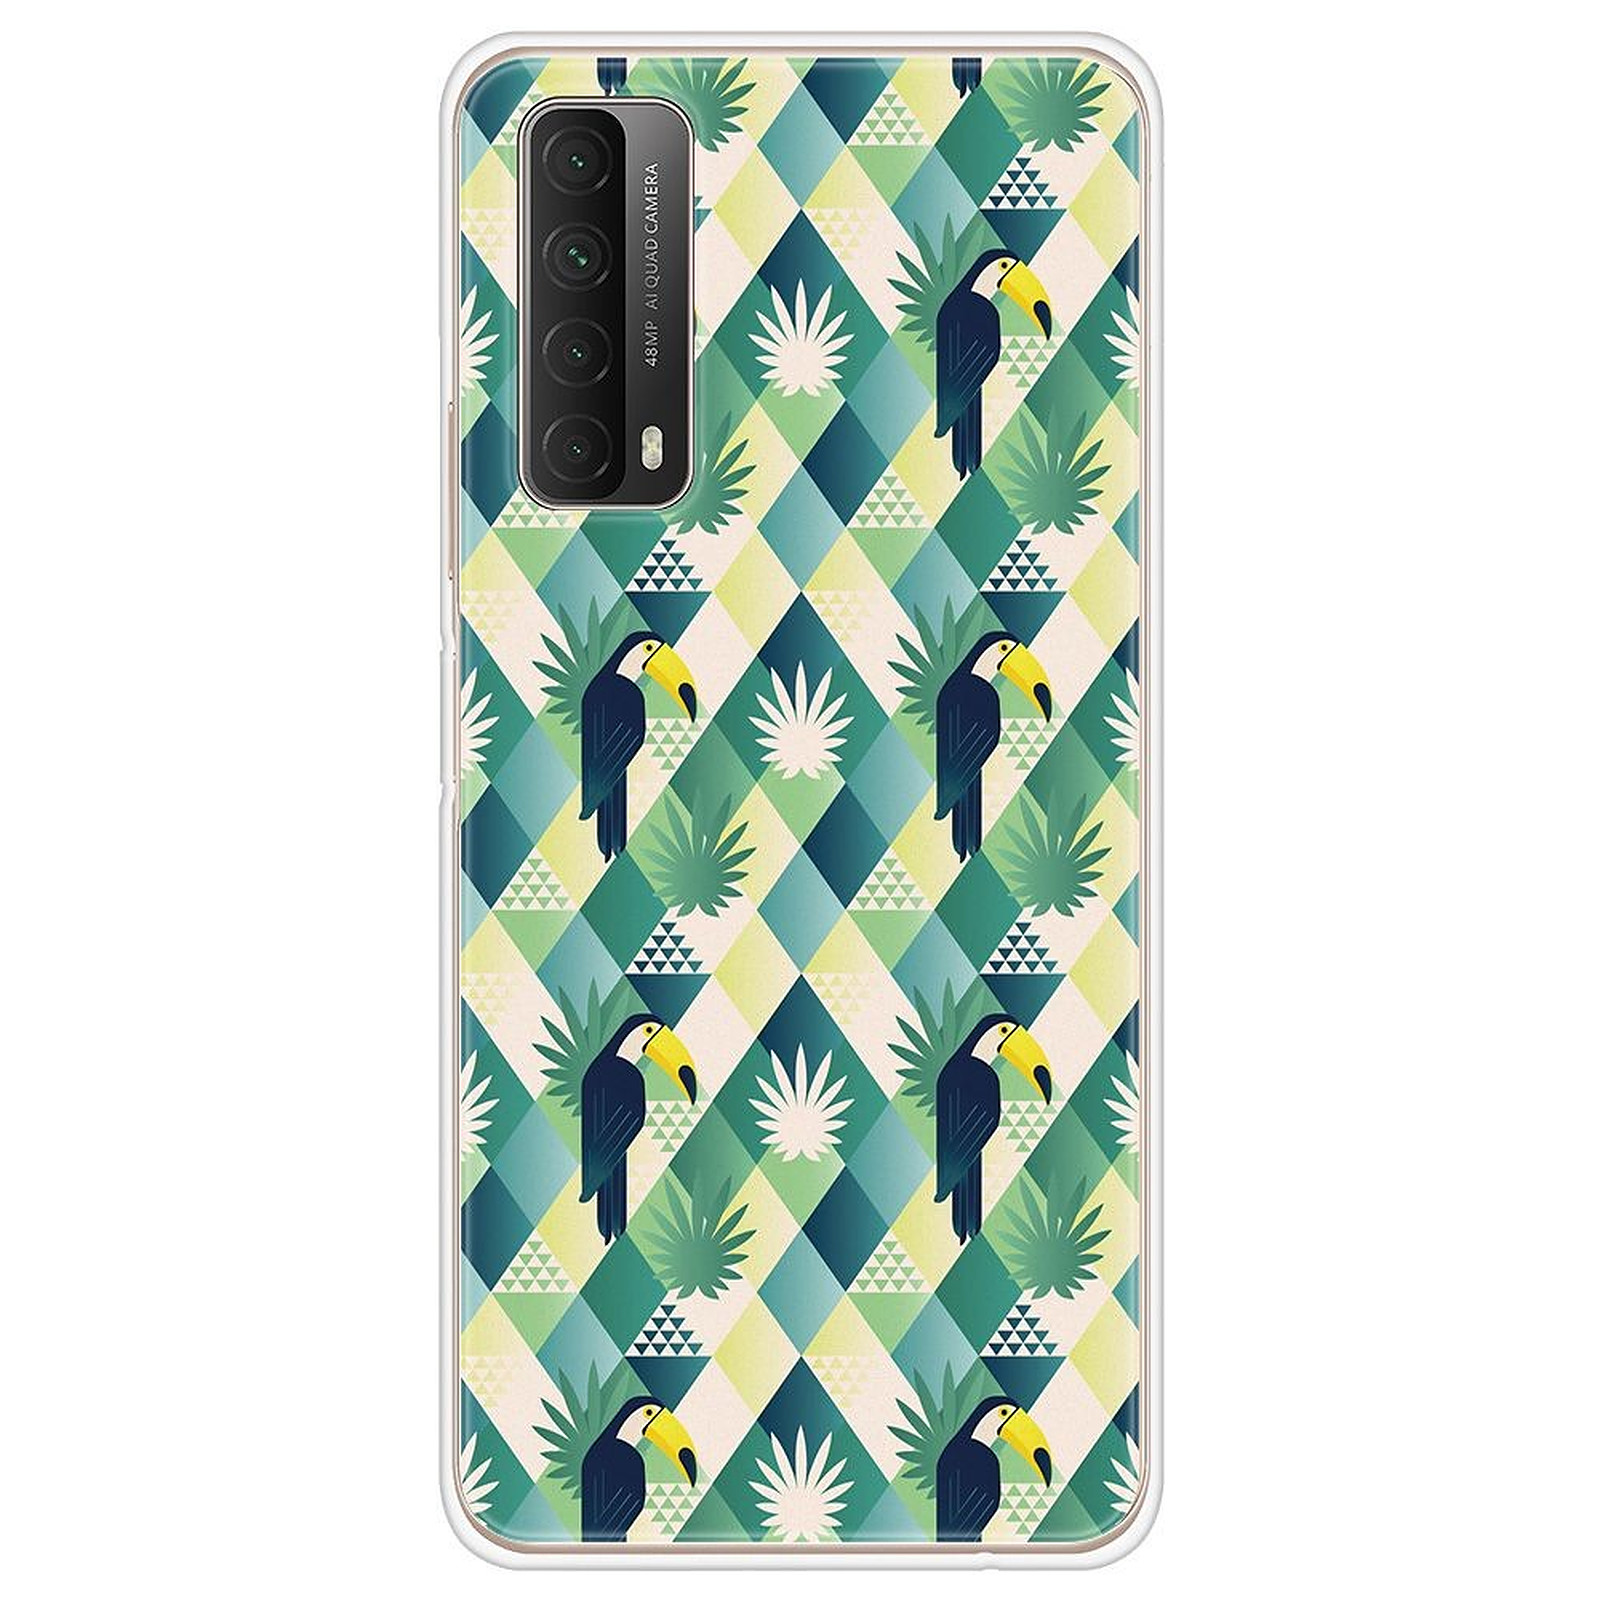 1001 Coques Coque silicone gel Huawei P Smart 2021 motif Toucan losange - Coque telephone 1001Coques